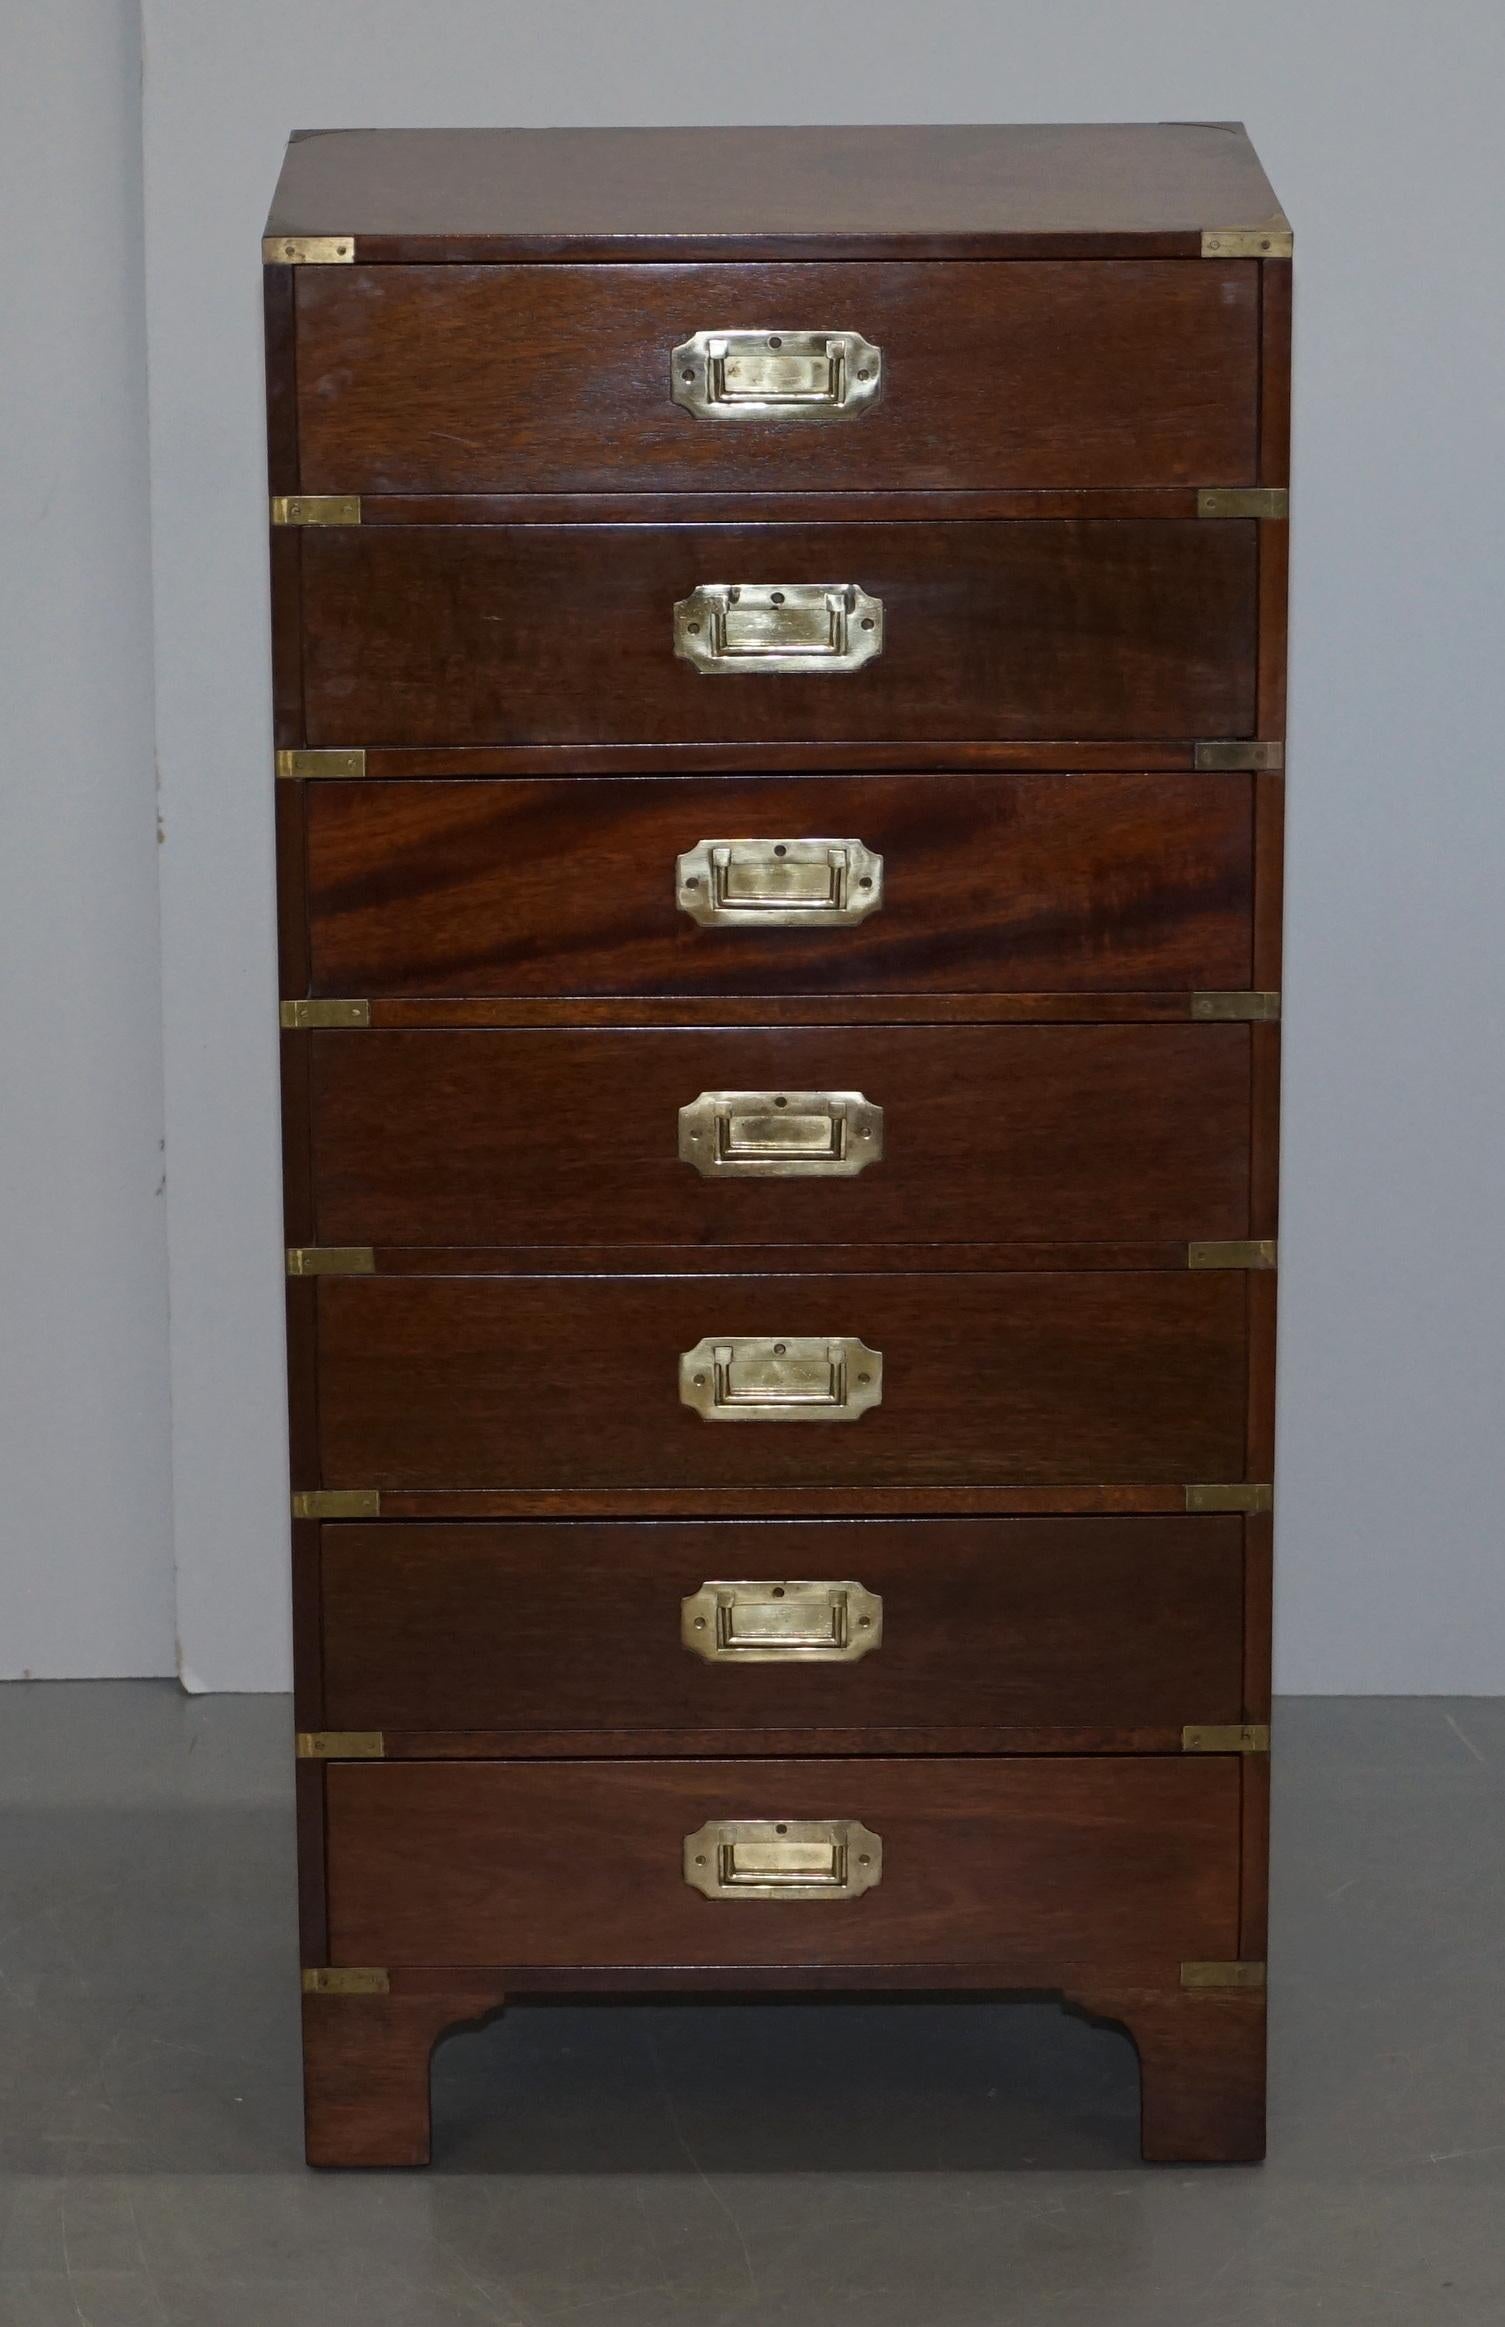 We are delighted to offer for sale this lovely vintage Military Campaign tallboy chest of drawers

A very good looking well made and decorative piece, it can be used in any room

We have cleaned waxed and polished it from top to bottom, the wood